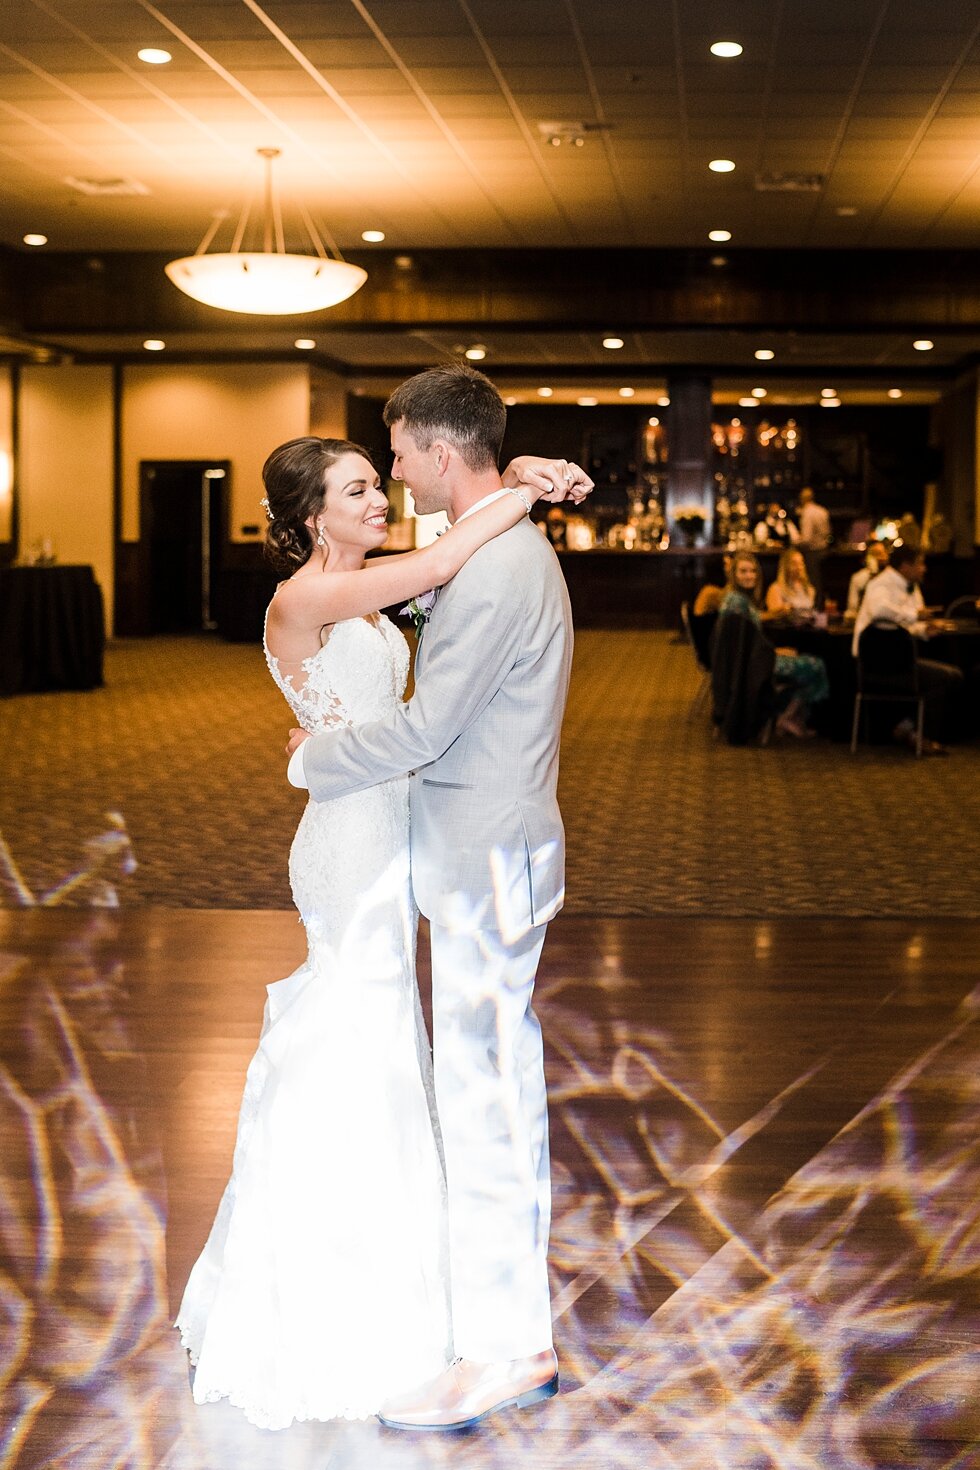  Bride and groom share their first dance together during their wedding reception. wedding ceremony details stunning photography married midwest louisville kentucky #weddingphoto #love #justmarried #midwestphotographer #kywedding #louisville #kentucky